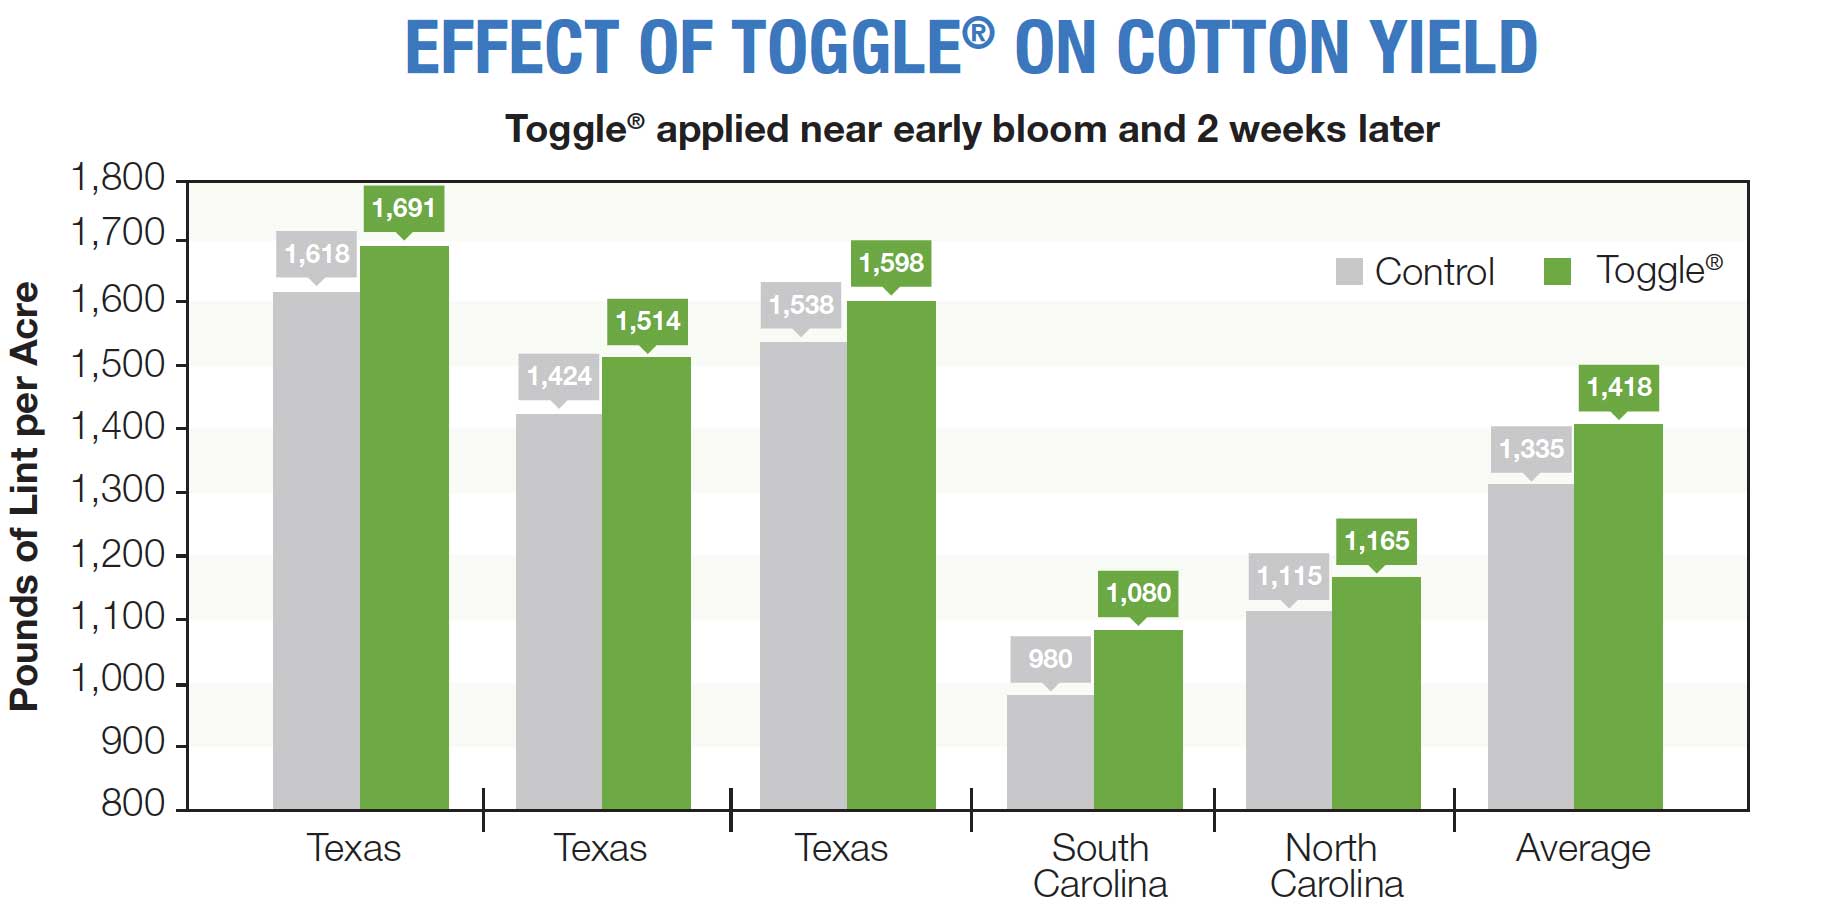 Effect of Toggle on Cotton Yield